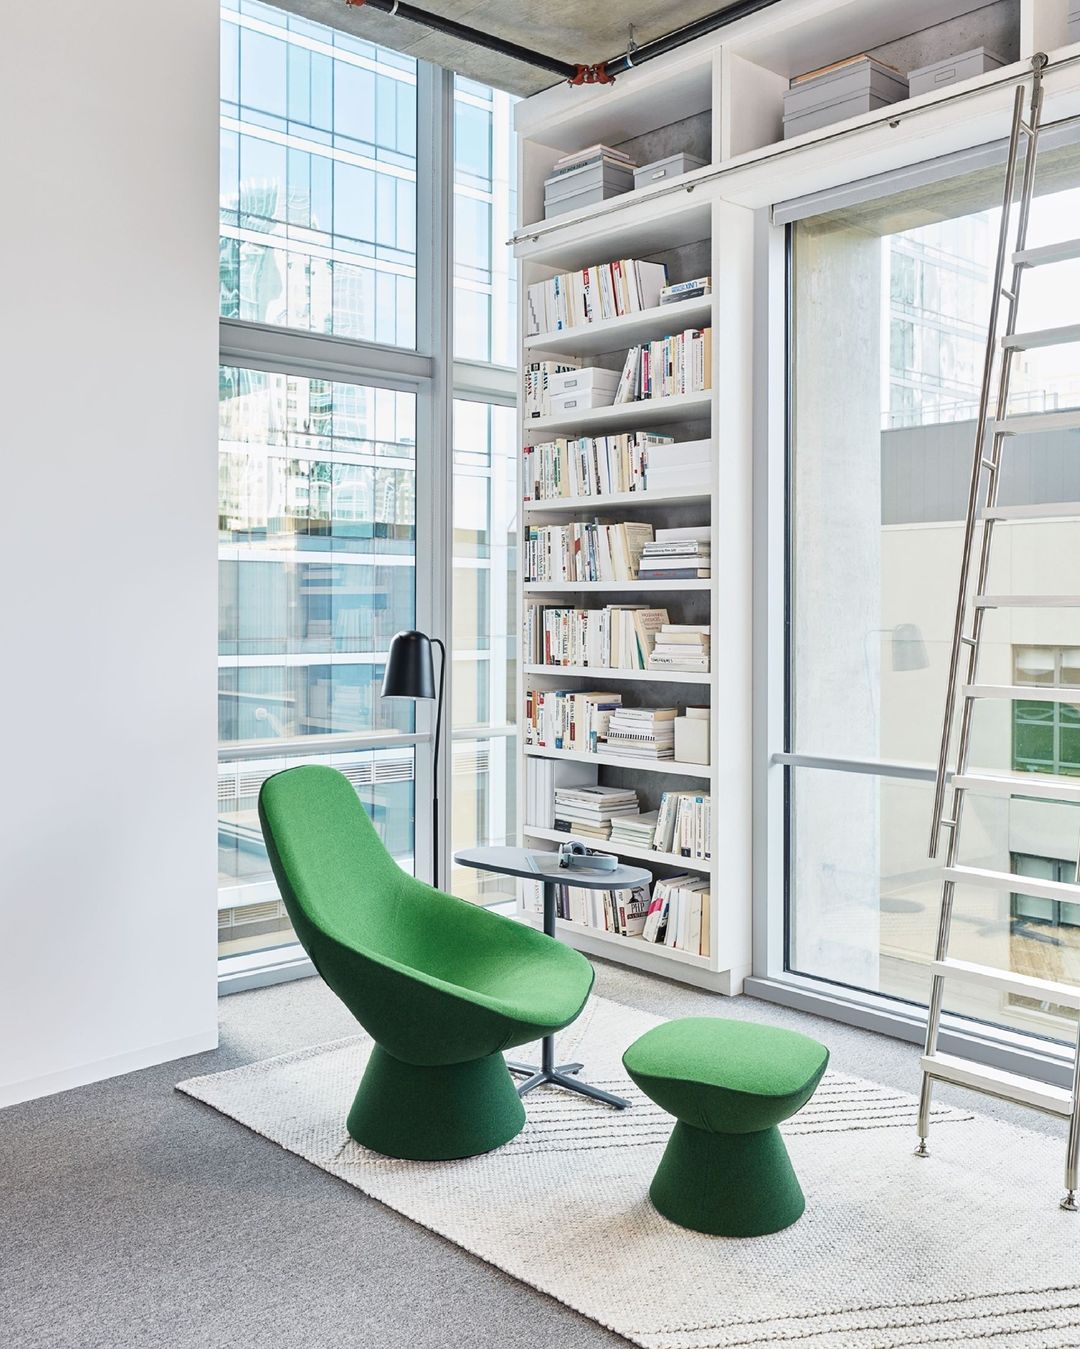 Modern Reading Area with Green Chair. Photo by Instagram user @studiotksocial